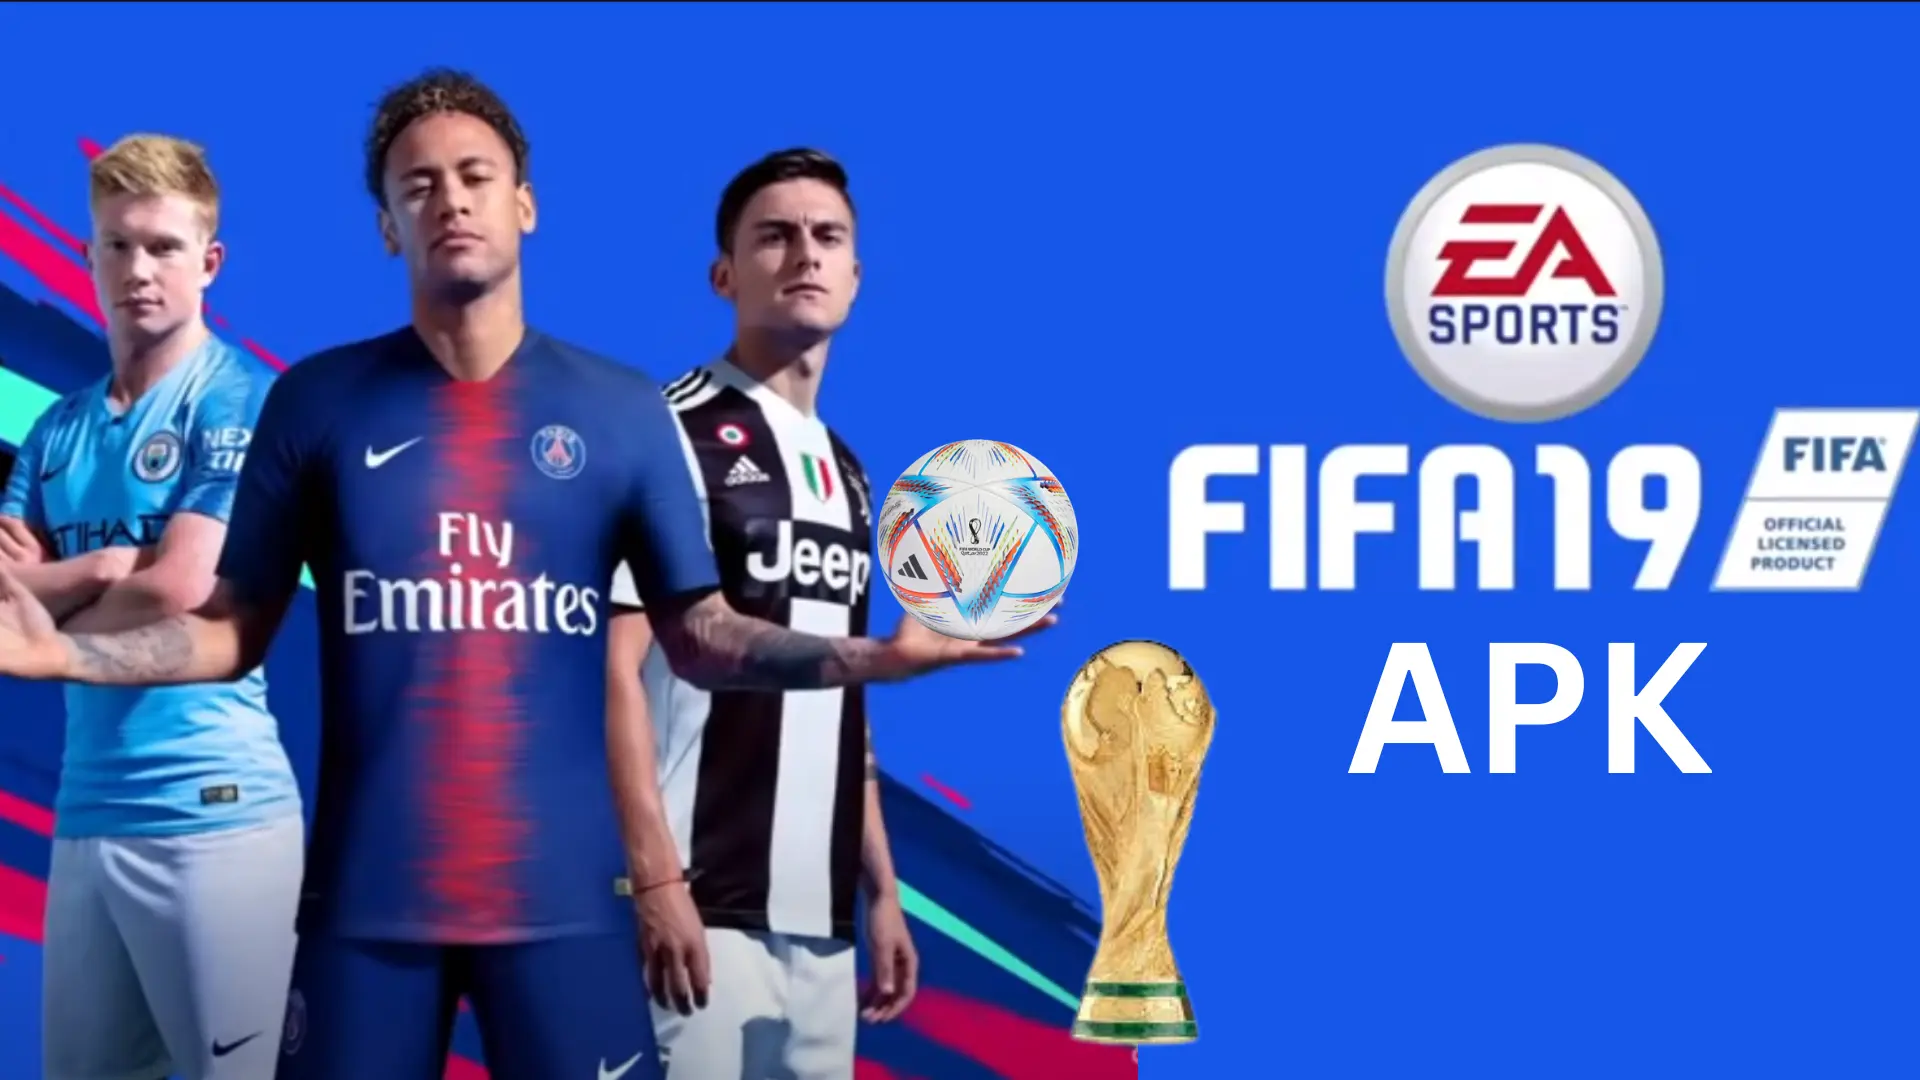 Head Soccer : Champions League 2019 APK for Android Download